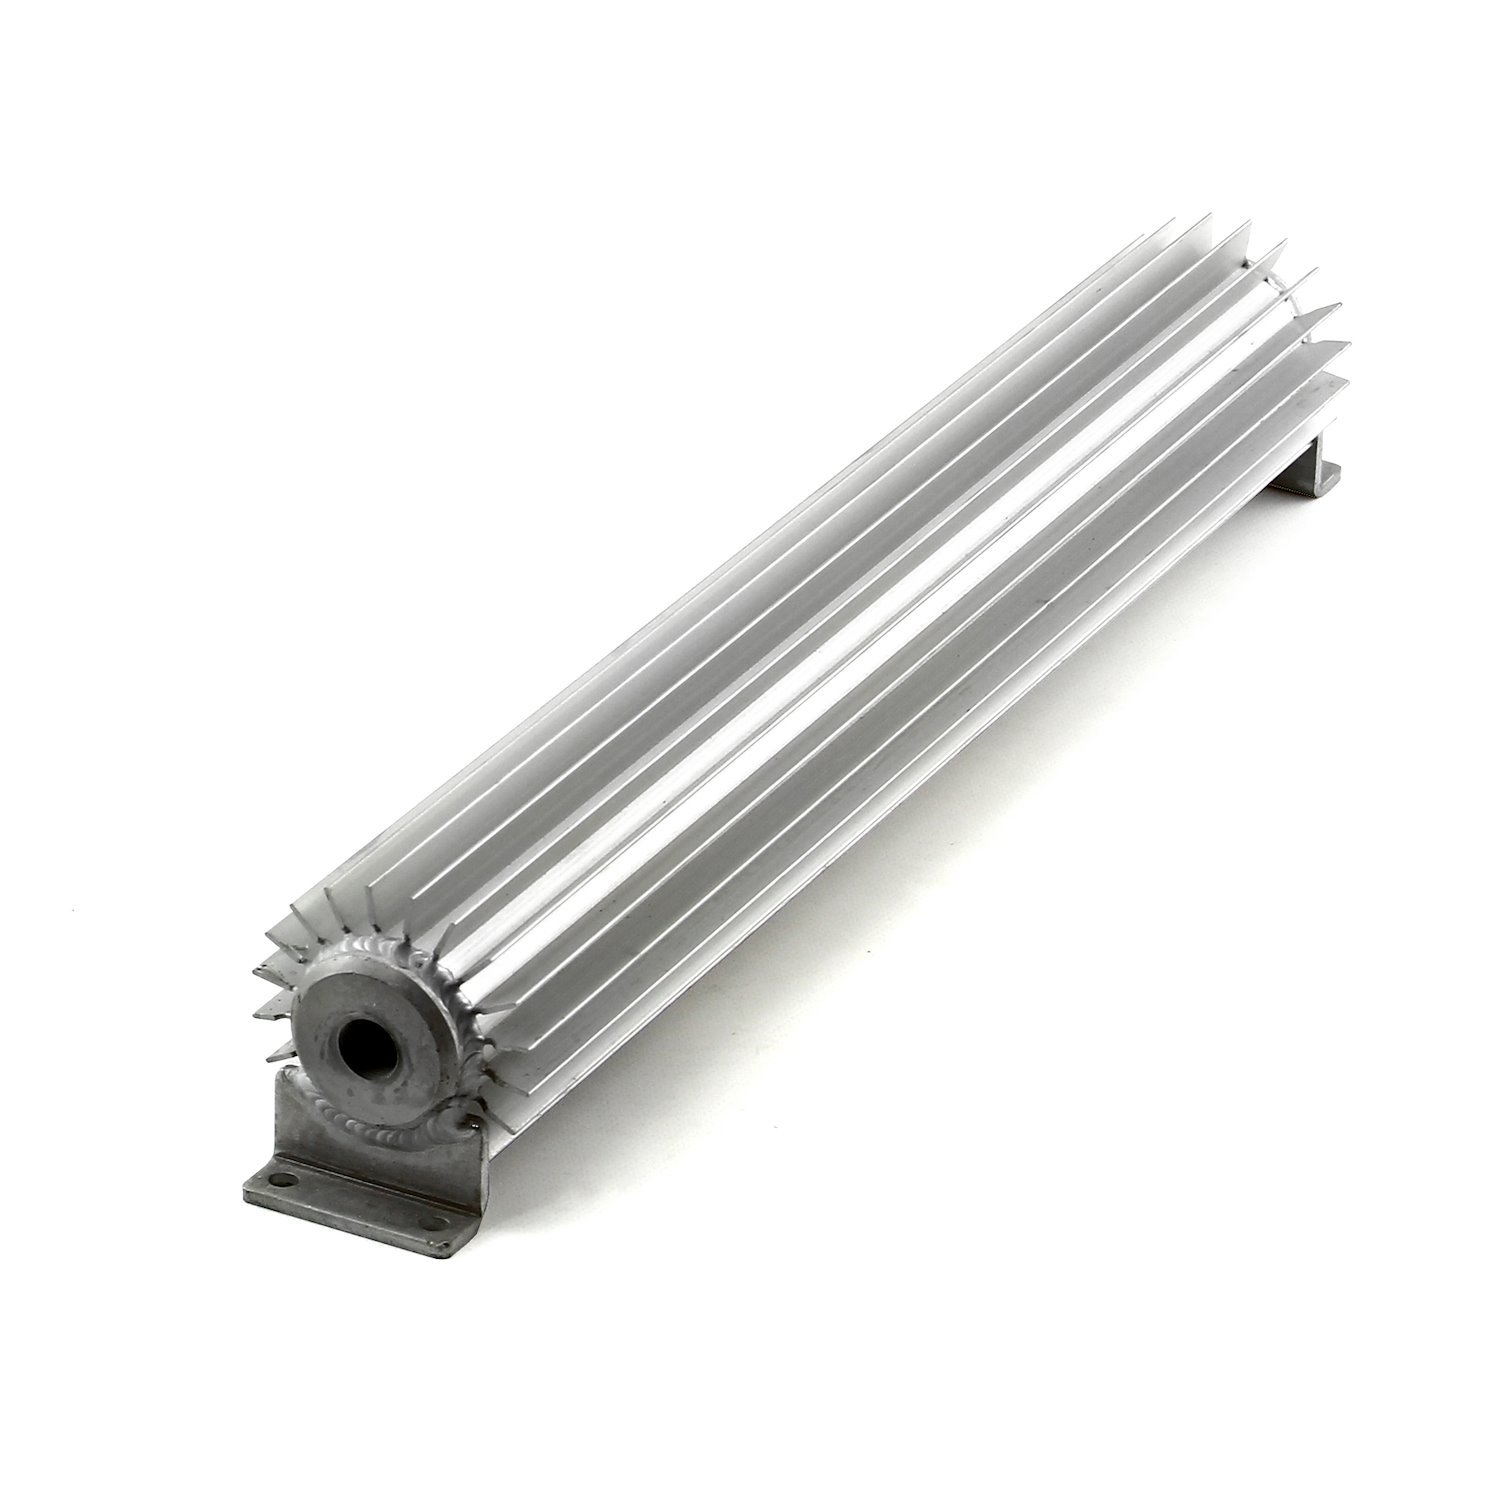 Single Pass Transmission Oil Cooler With 3/8" Hose Barb Fittings Overall: 3" H x 3.25" T x 18" W